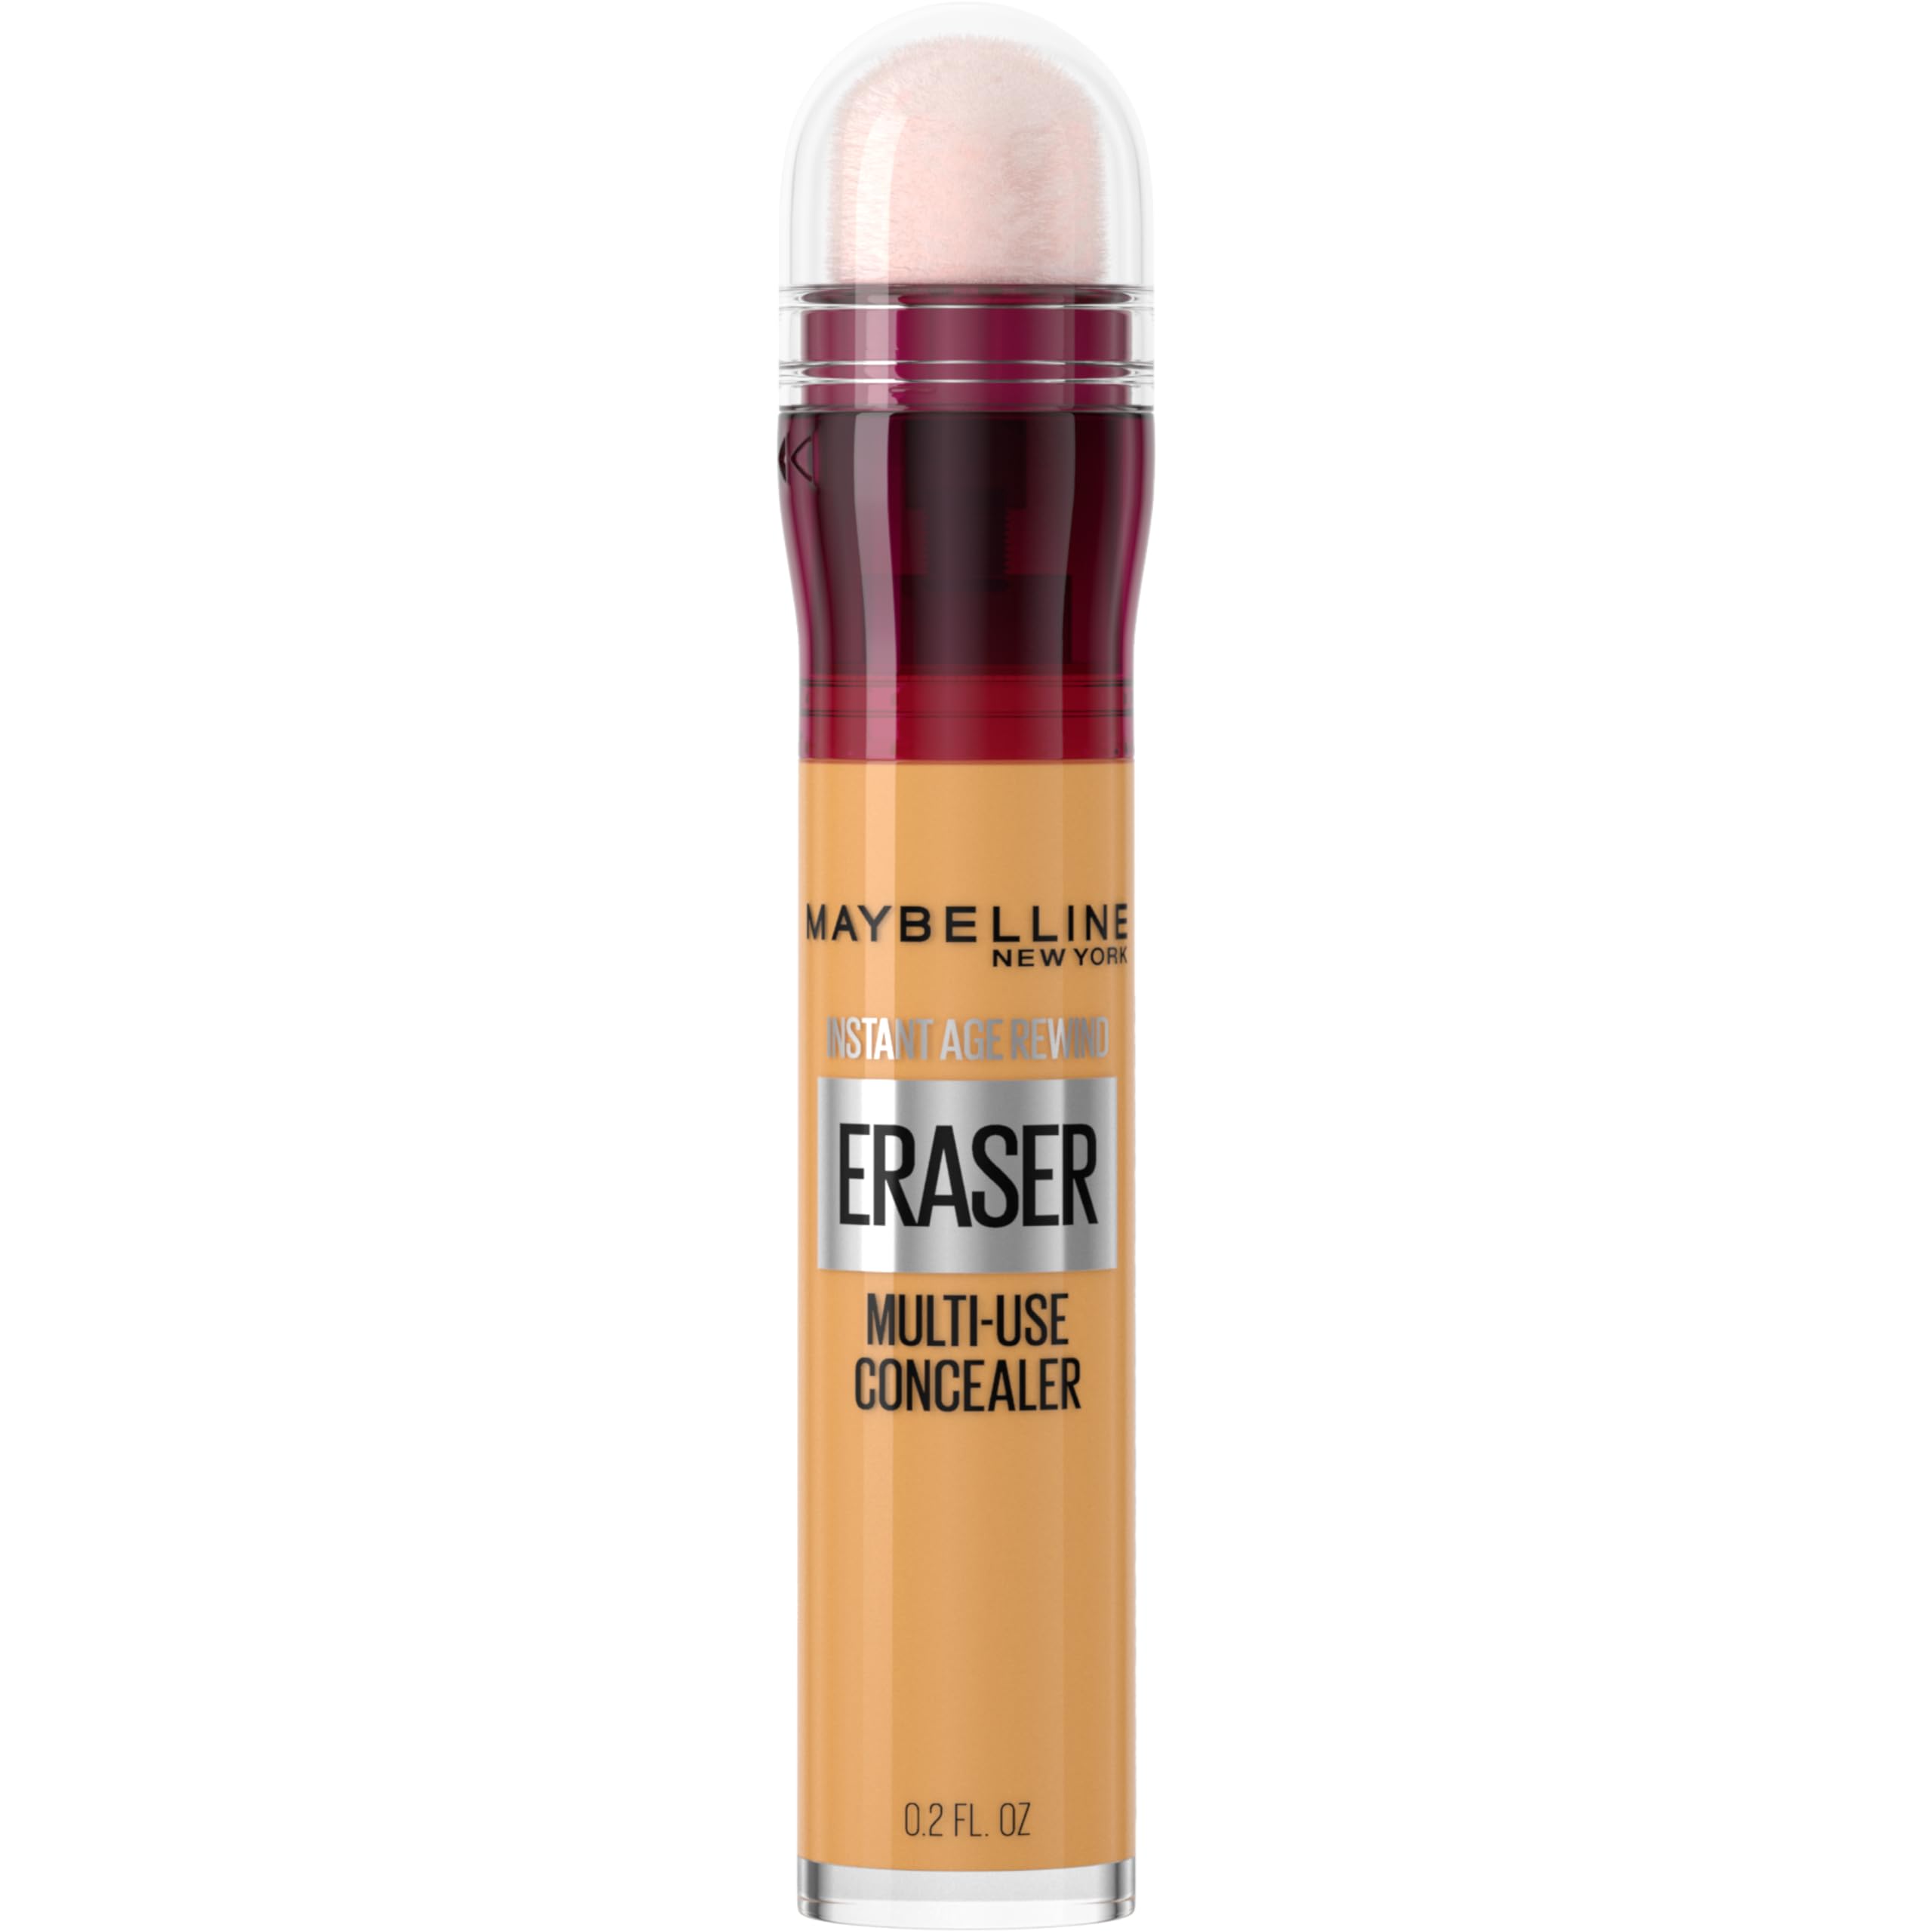 Maybelline New York Maybelline Instant Age Rewind Eraser Dark Circles Treatment Multi-Use Concealer, 141, 1 Count (Packaging May Vary)